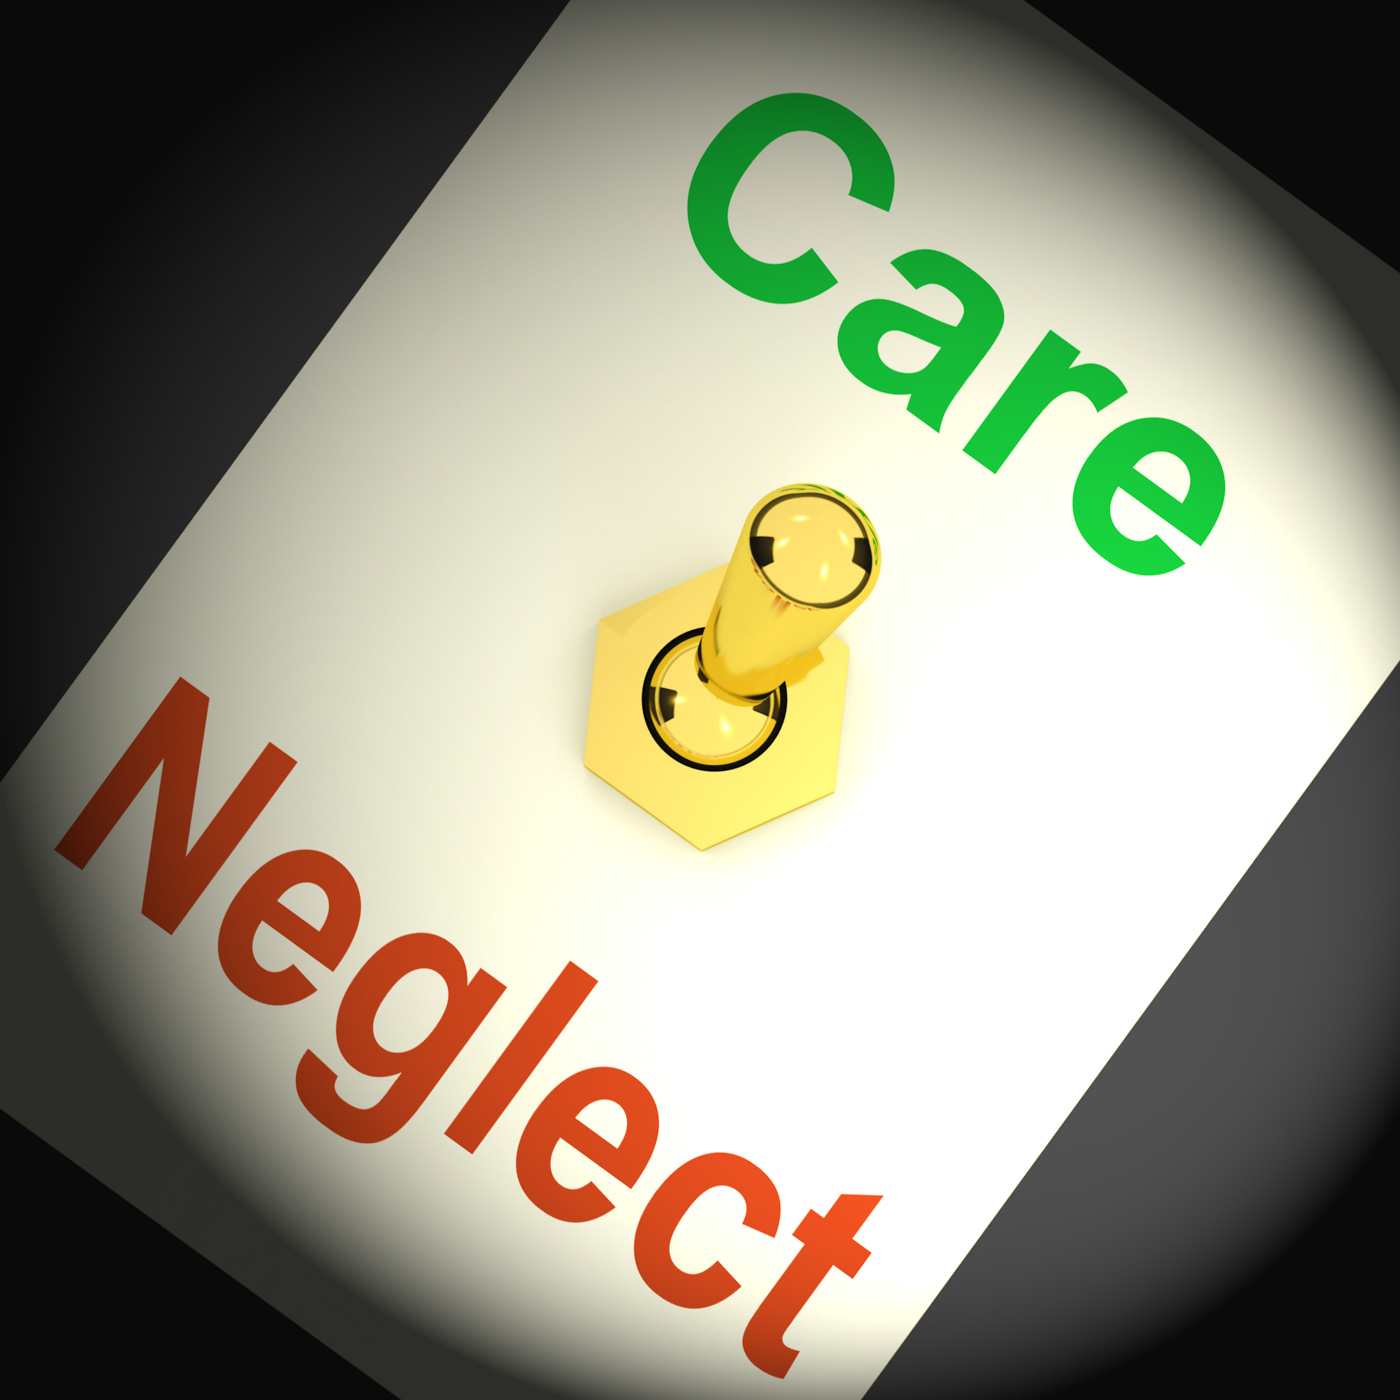 Care neglect lever means compassionate or irresponsible photo